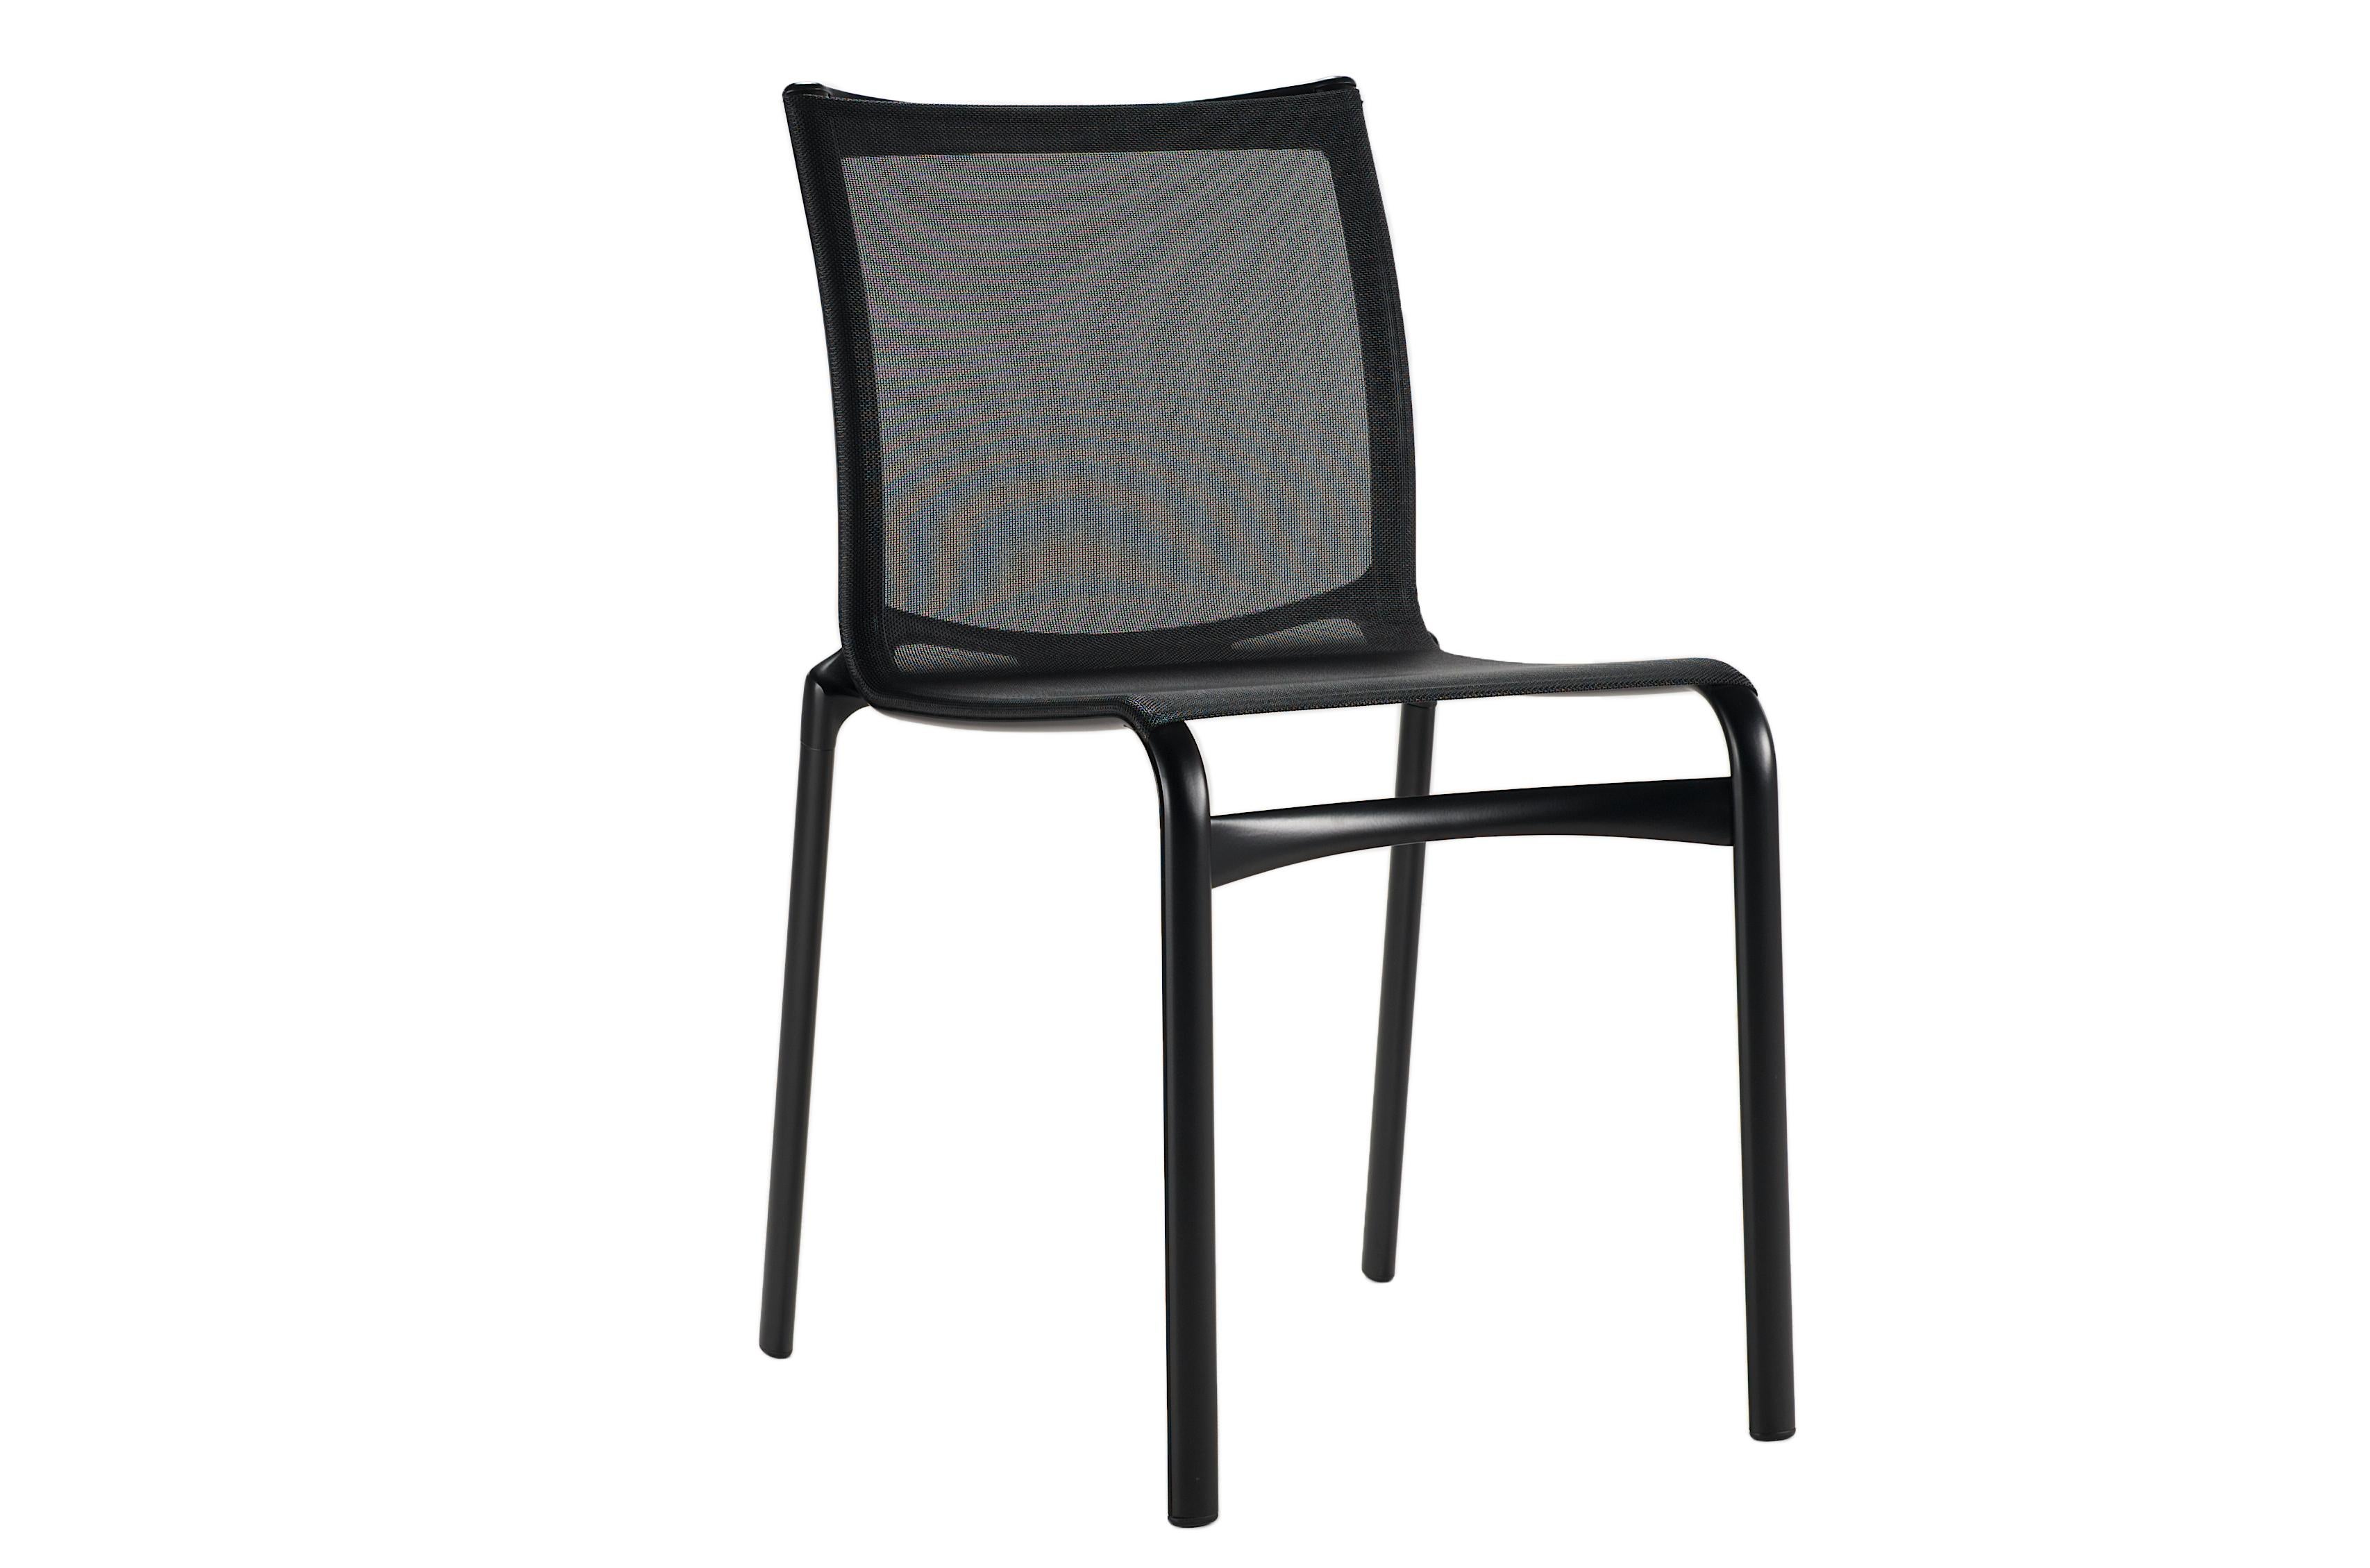 Italian Alias Bigframe 44 Chair in Black Mesh Seat with Lacquered Aluminium Frame For Sale